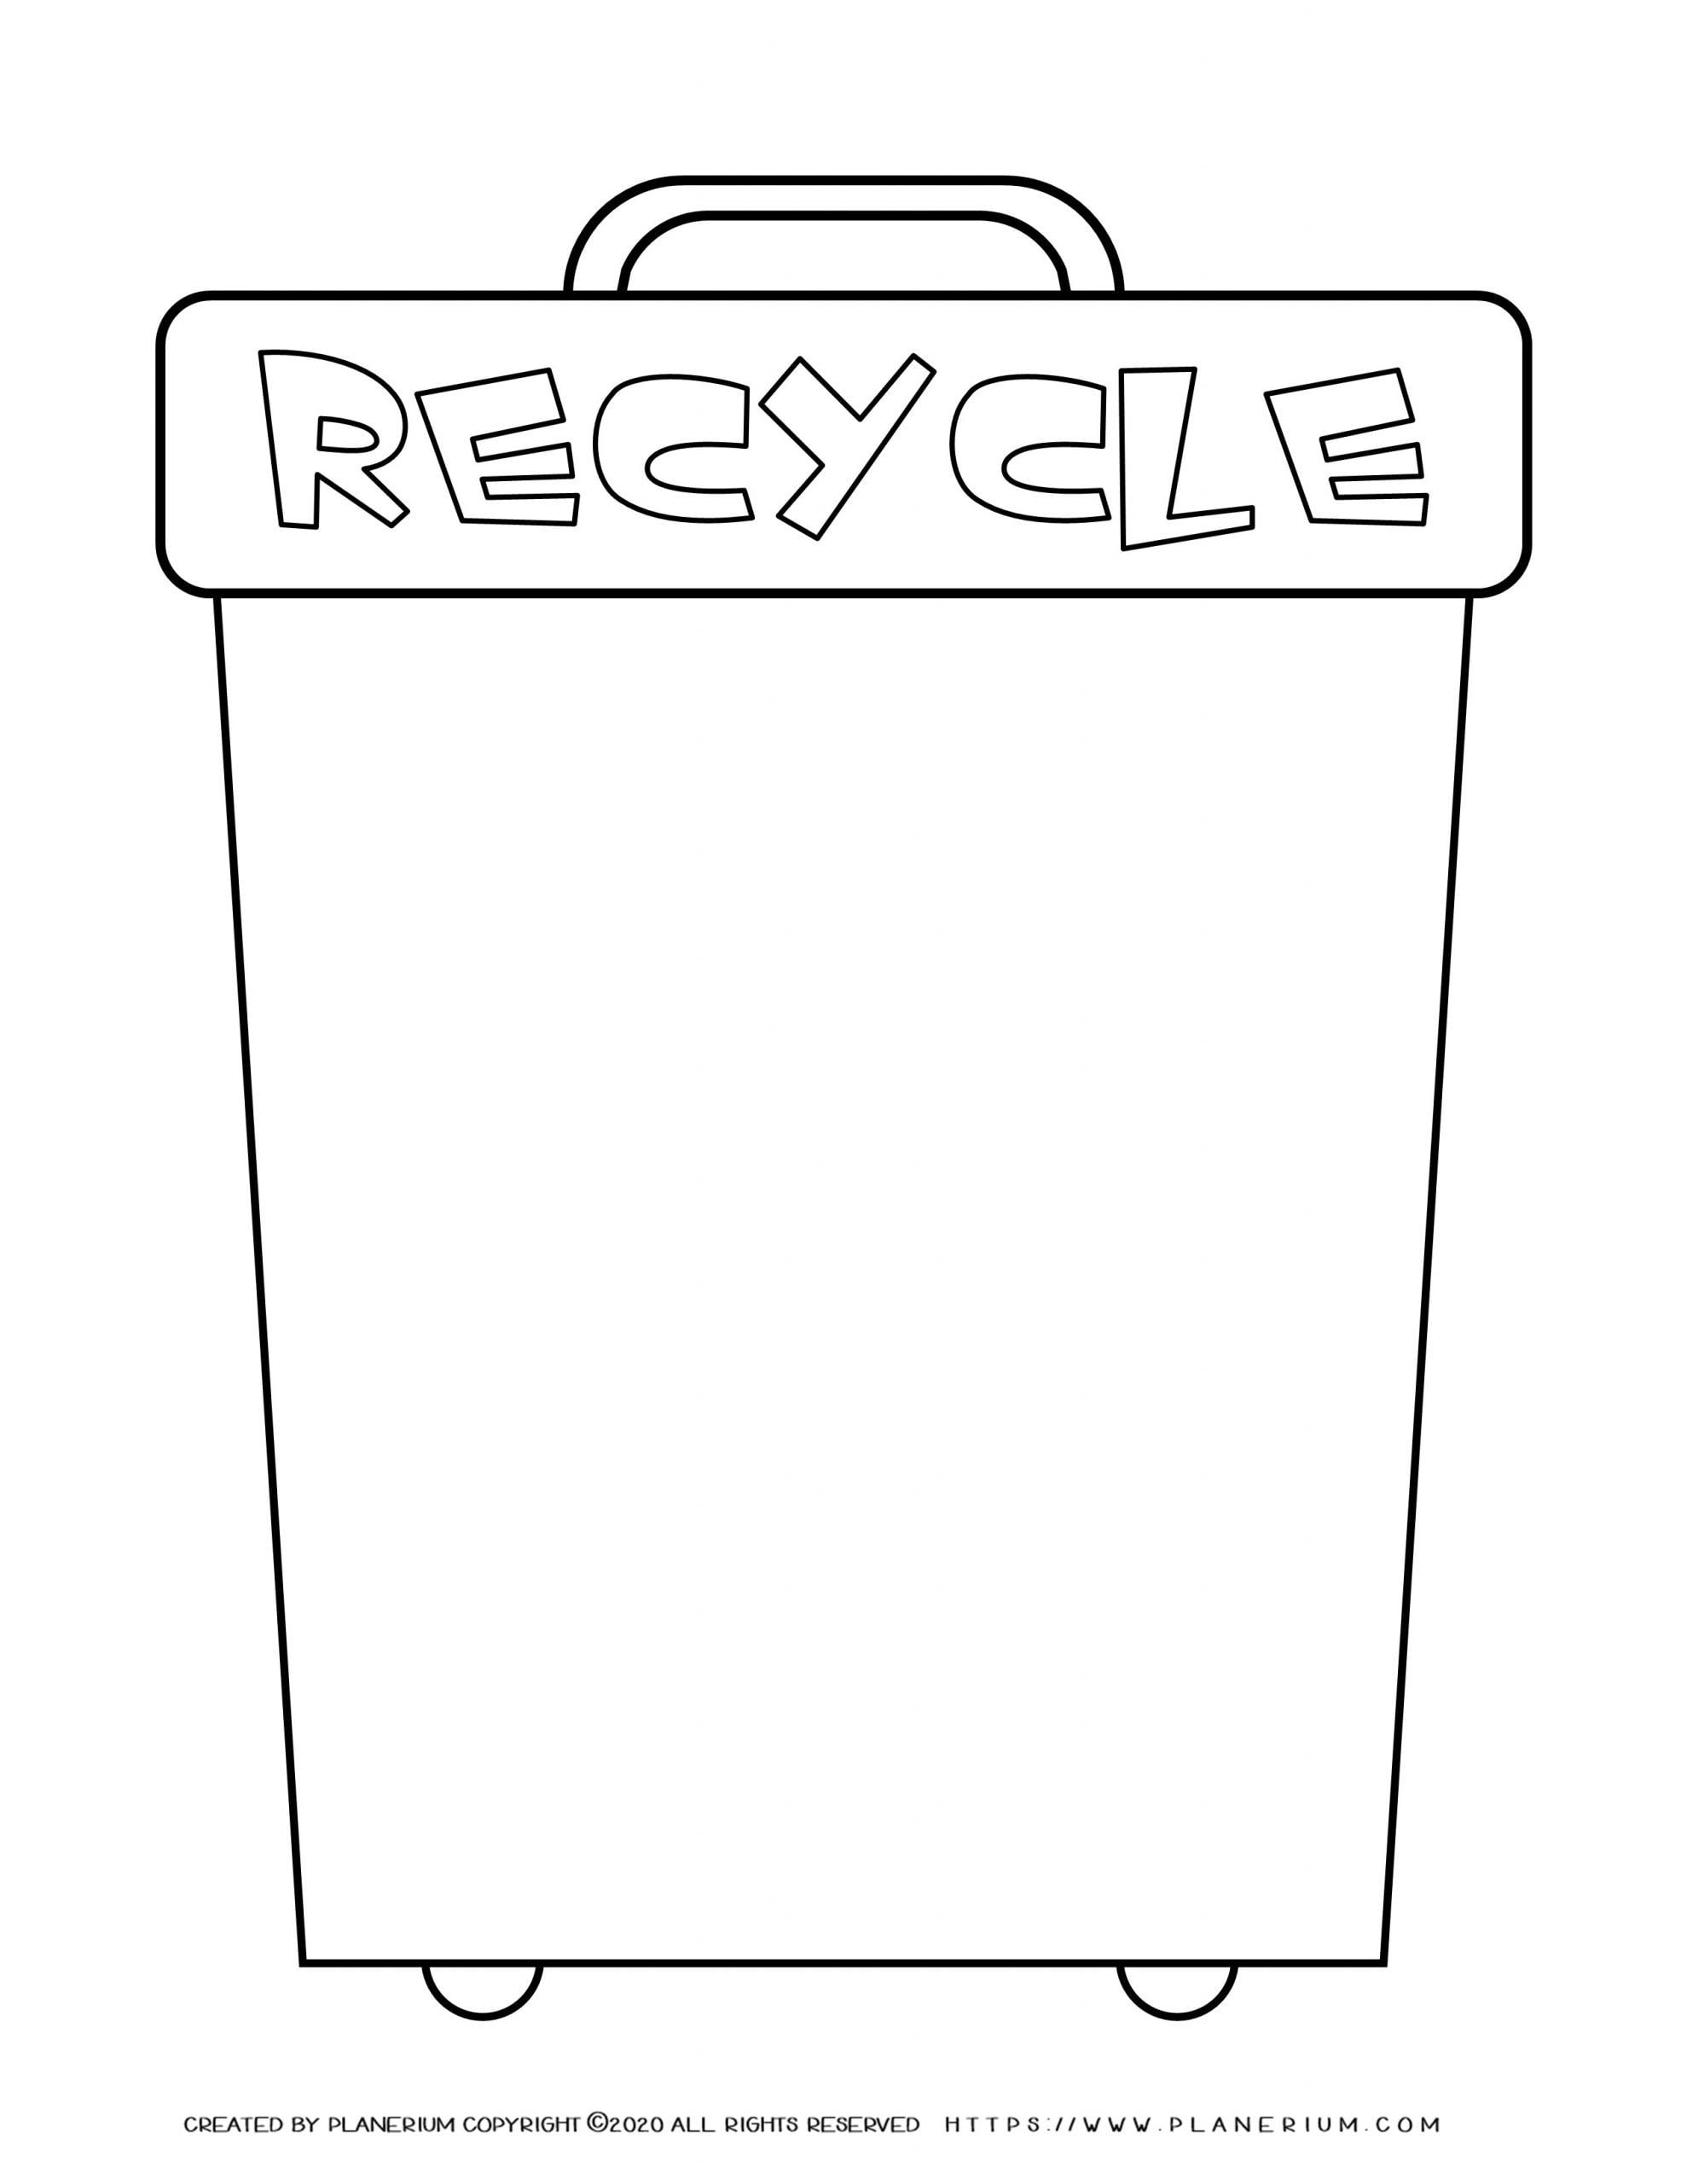 earth day recycling worksheets